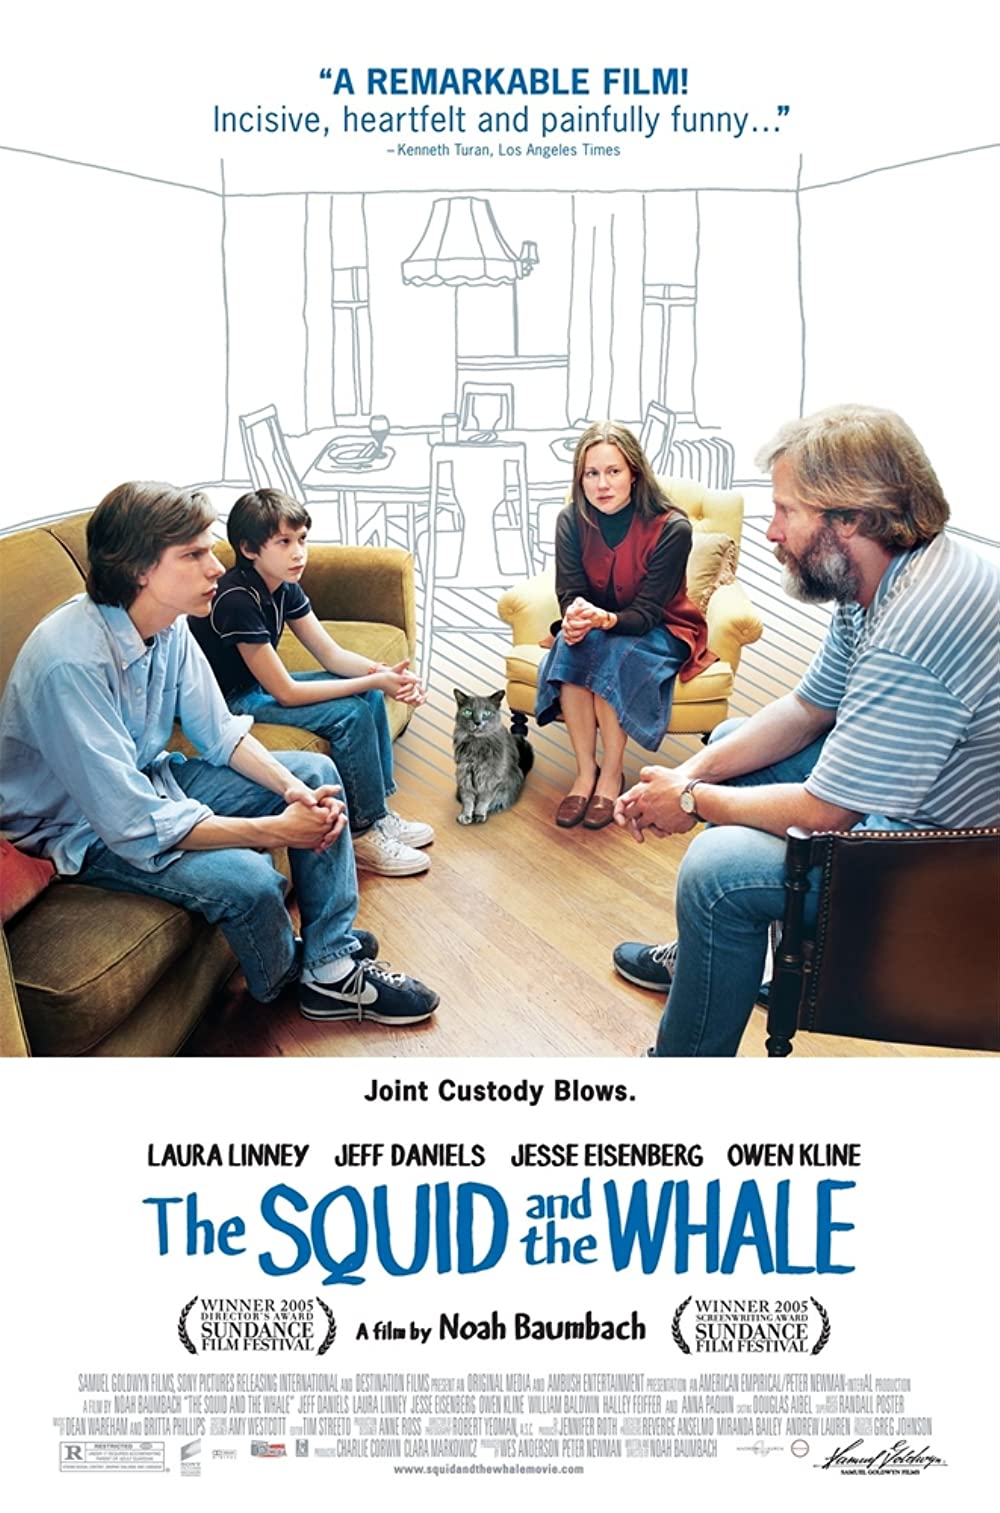 ▷ The Squid and the whale